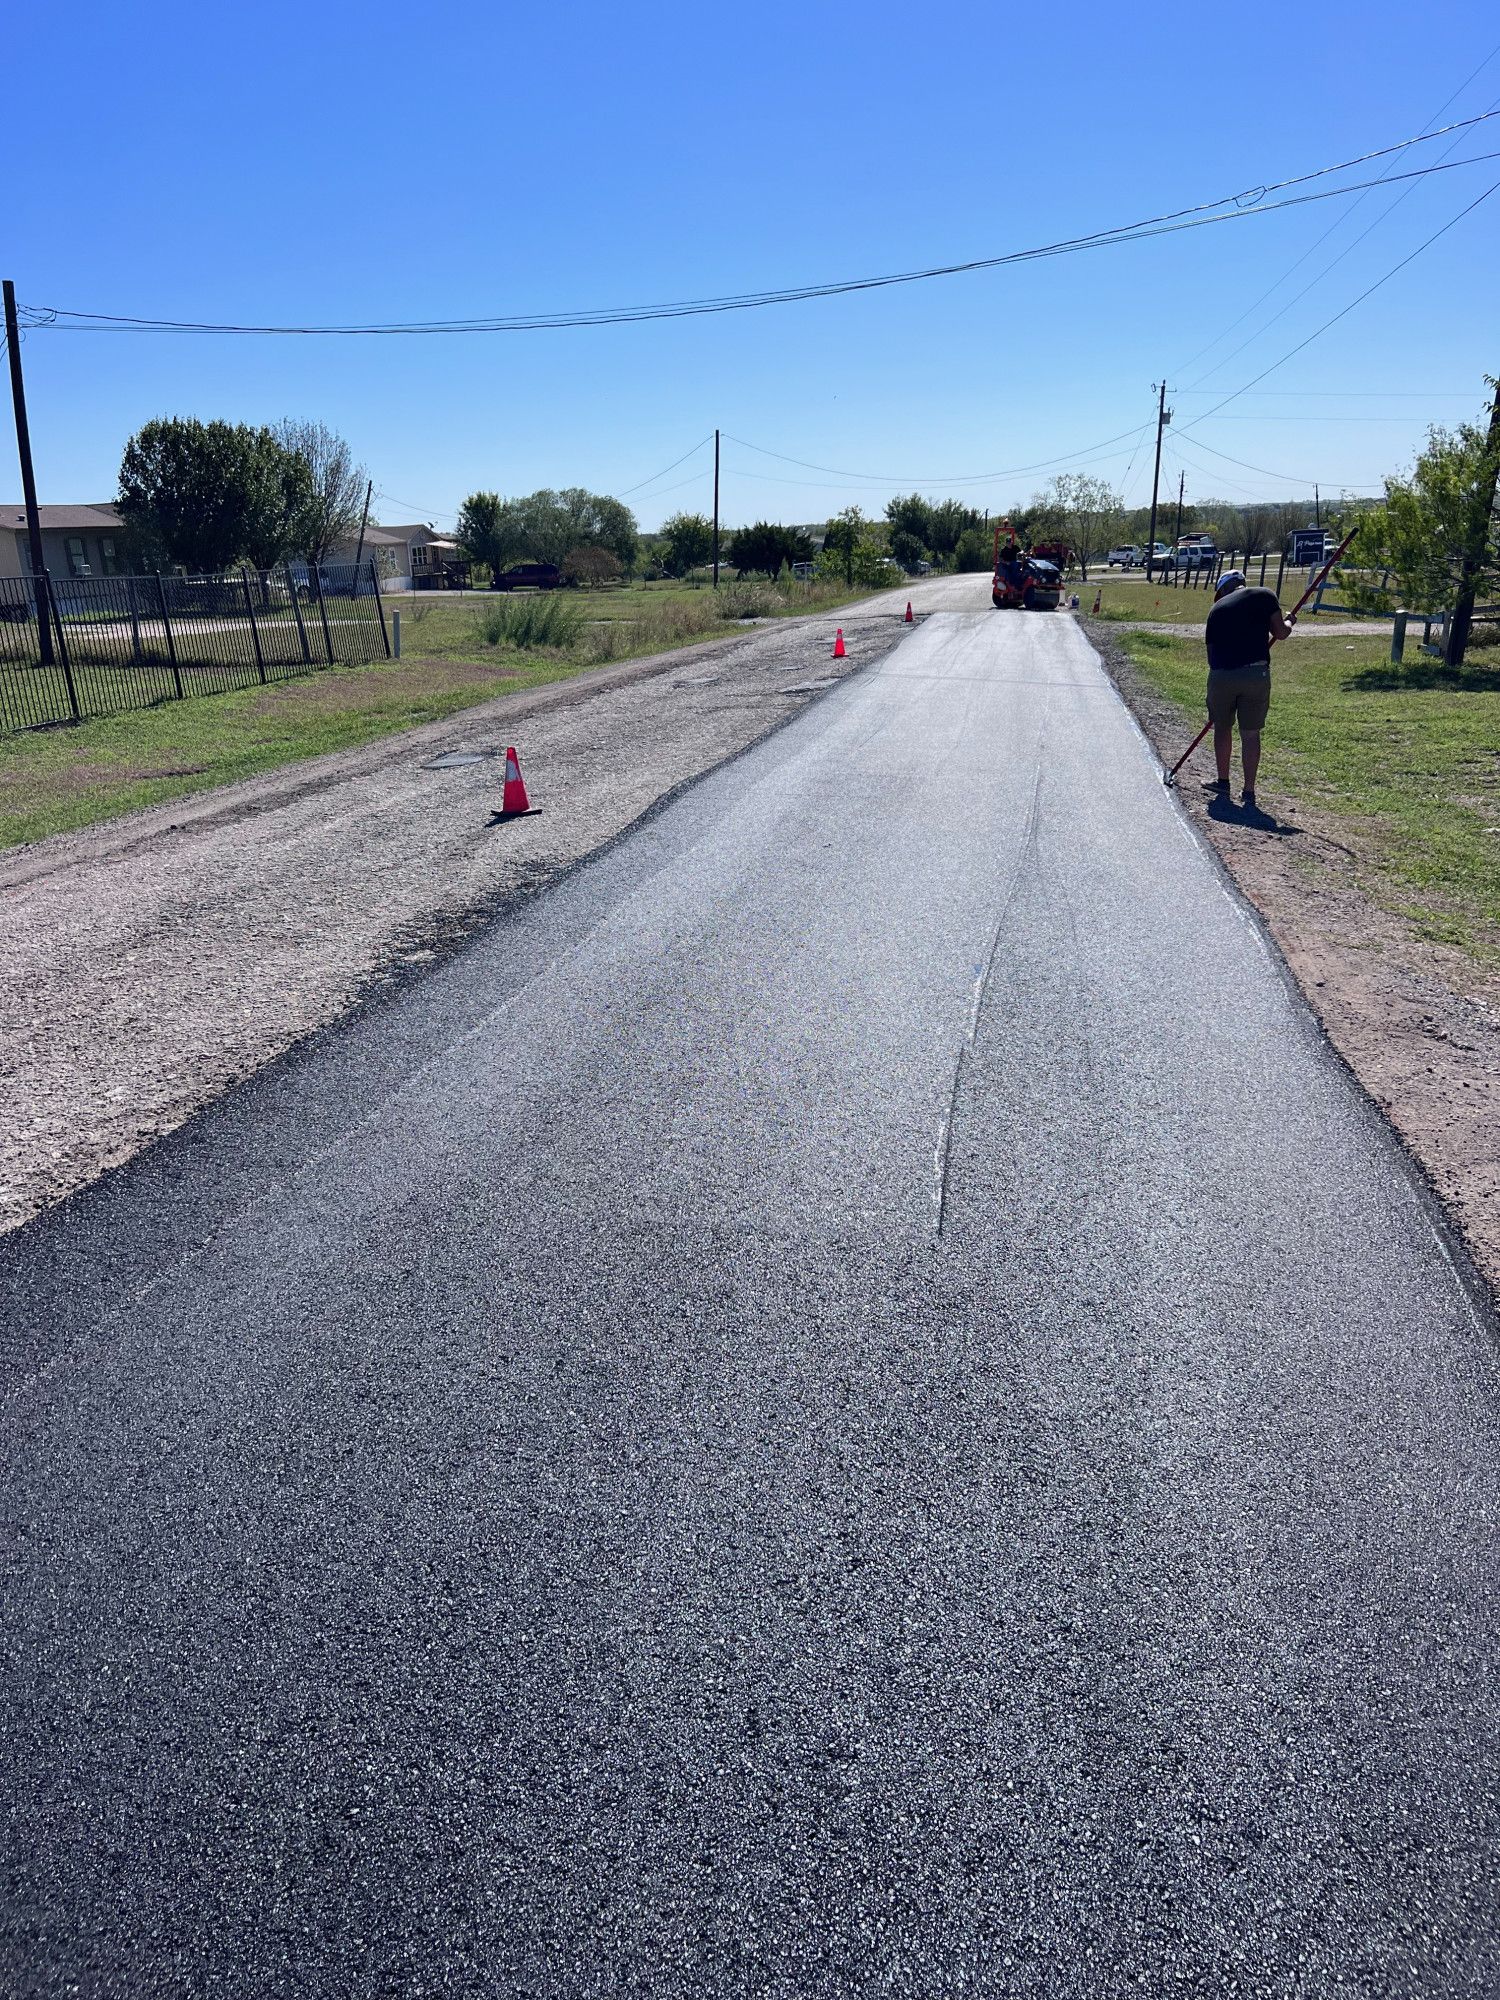 Driveway Restoration completed by Pavement Solutions in Austin, TX.